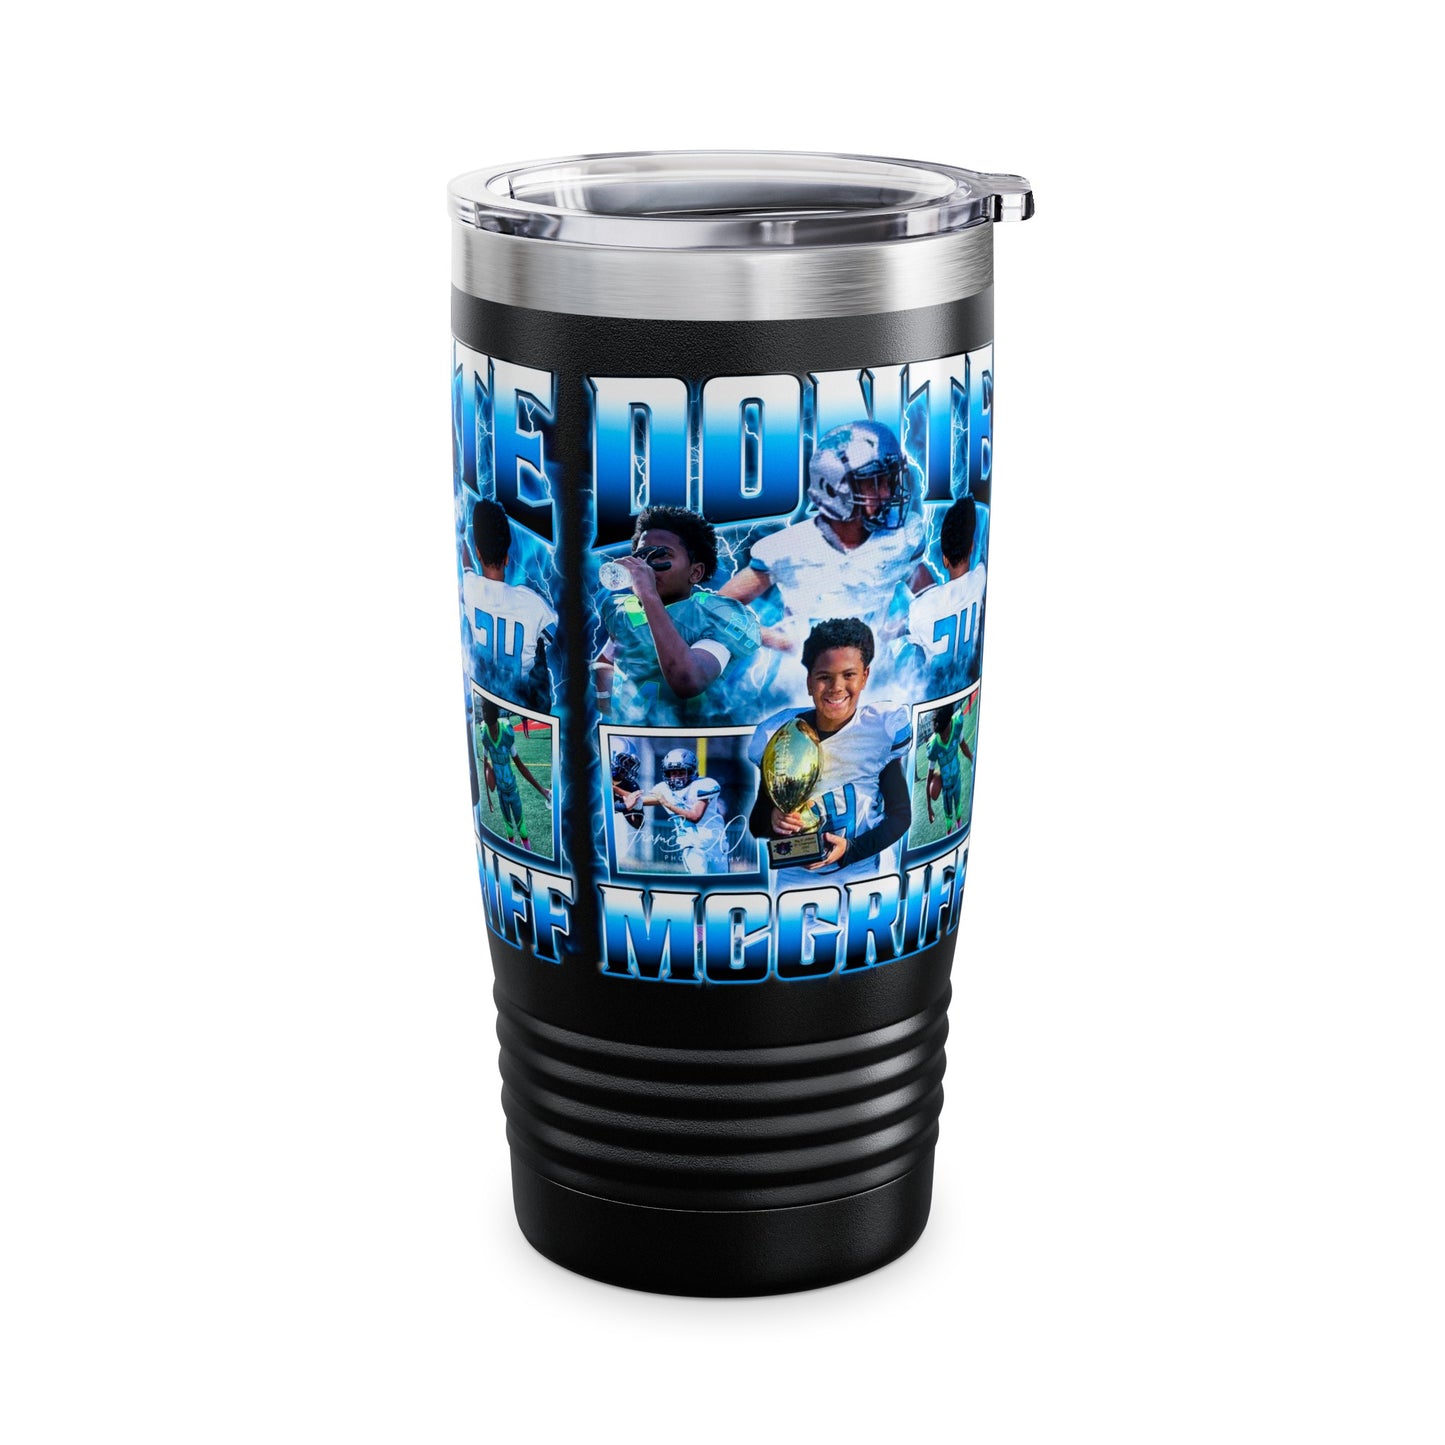 Donte Mcgriff Stainless Steal Tumbler